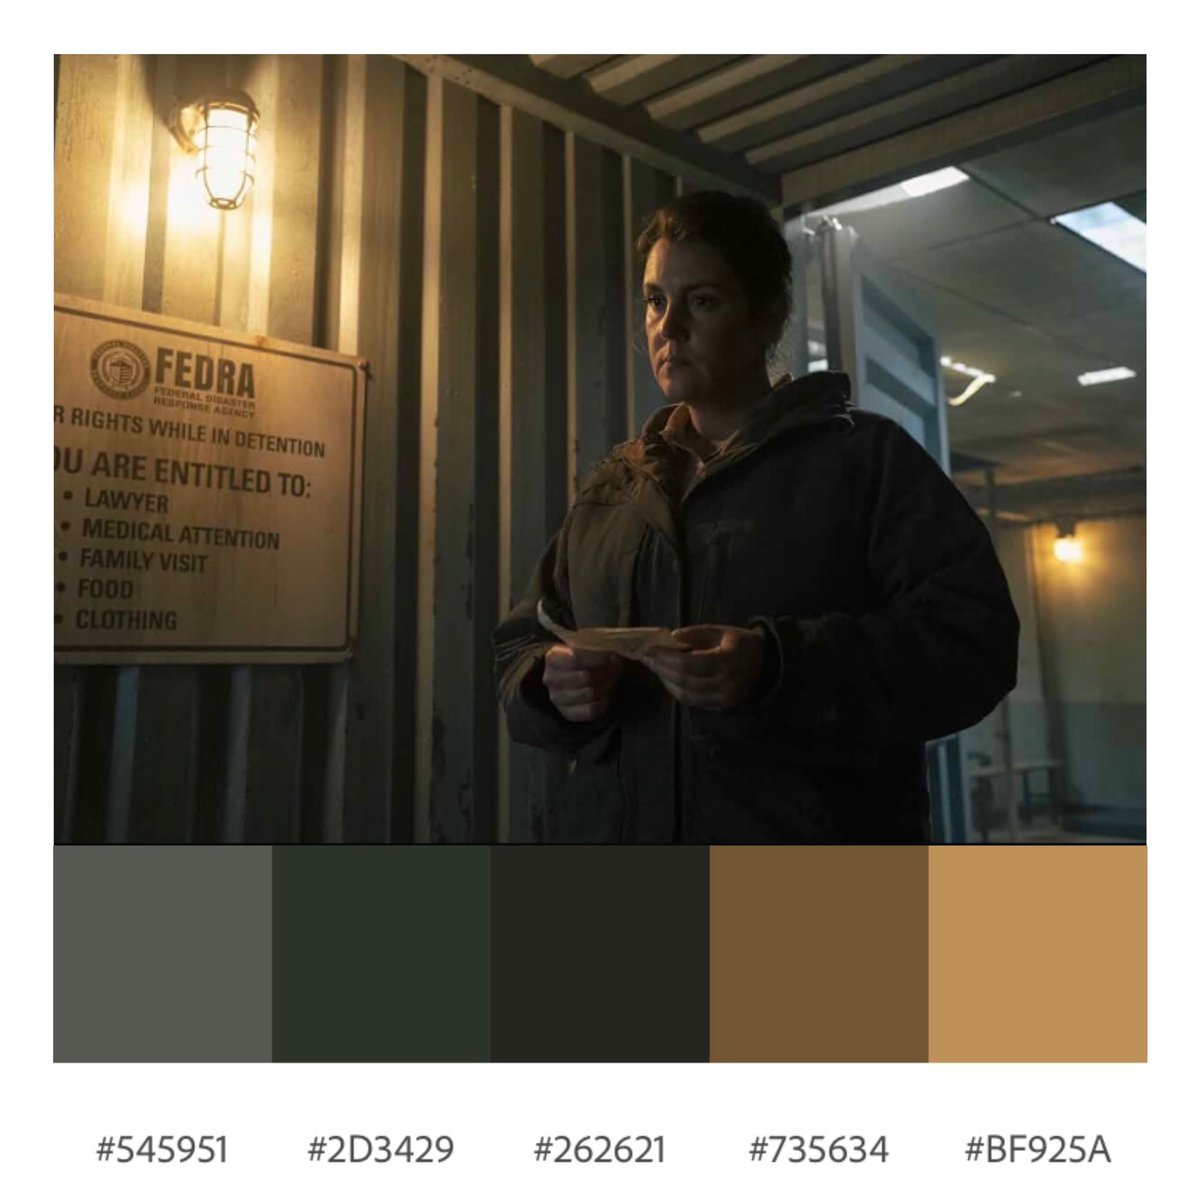 ✨Please Hold to My Hand - S1 E4 The Last of Us (Jeremy Webb, 2023)

#tv #shows #cinema #cinephile #cinematography #shots #aesthetic #streaming #theatre #art #artist #color #colorpalette #palette #colourpalette #photography #thelastofus #bellaramsey #pedropascal #gaming